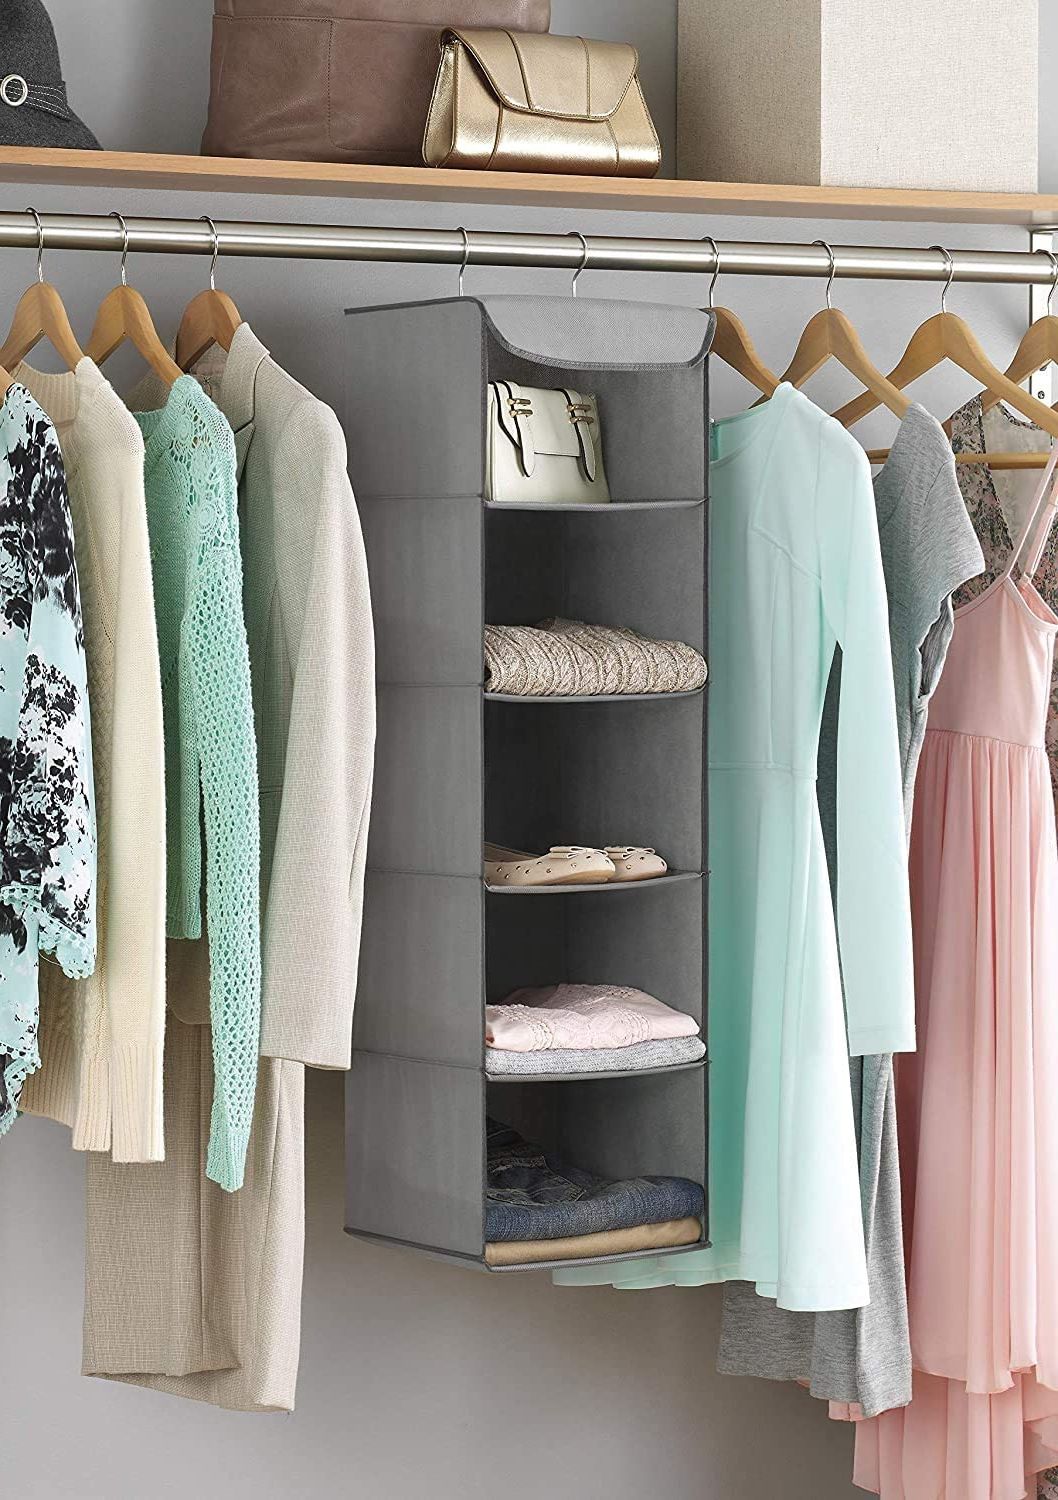 27 Best Closet Organization Ideas For A Much Cleaner, Tidier Space Throughout Hanging Wardrobes Shelves (View 4 of 20)